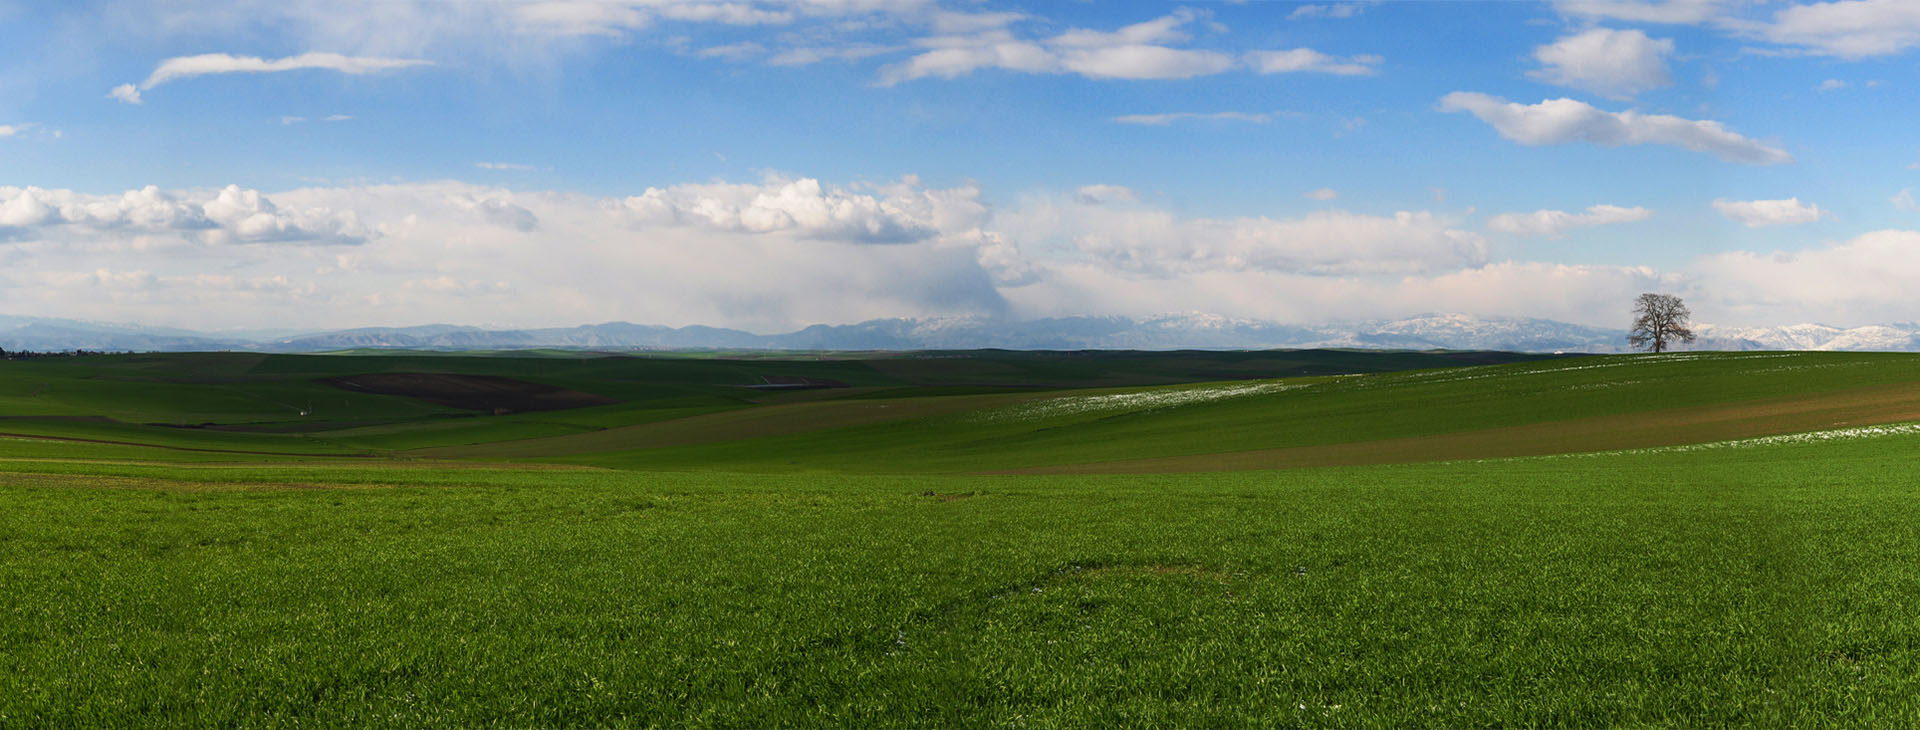 Thessaly plains